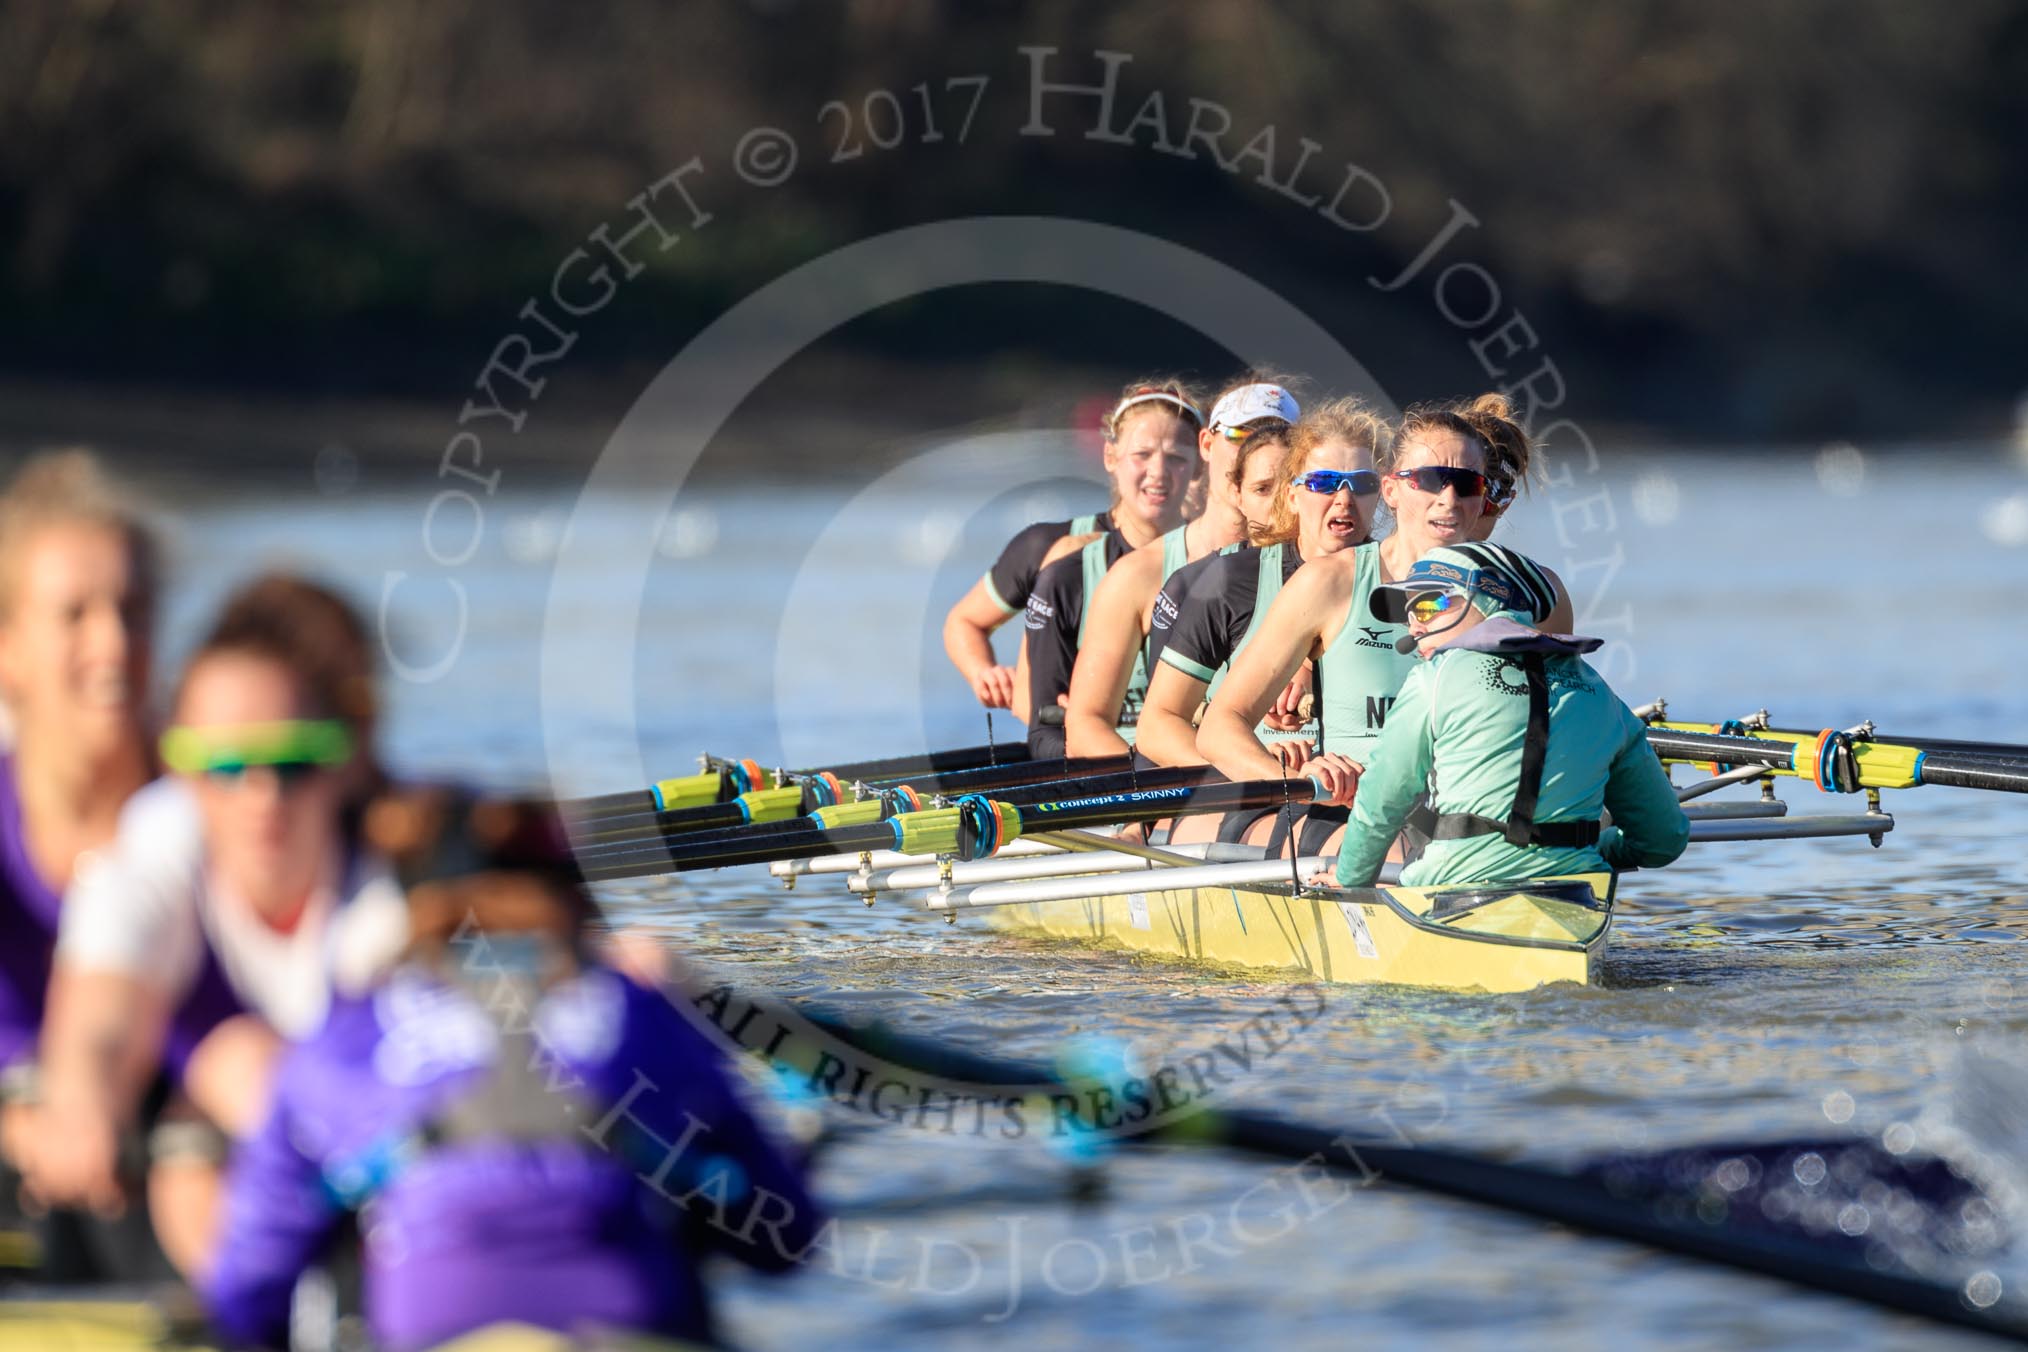 The Women's Boat Race season 2018 - fixture CUWBC vs. ULBC: ULBC and CUWBC - here, in the Cambridge  boat, just having crossed the finish line, bow Olivia Coffey, 2 Myriam Goudet-Boukhatmi, 3 Alice White, 4 Paula Wesselmann, 5 Thea Zabell, 6 Anne Beenken, 7 Imogen Grant, stroke Tricia Smith, cox Sophie Shapter.
River Thames between Putney Bridge and Mortlake,
London SW15,

United Kingdom,
on 17 February 2018 at 13:35, image #170